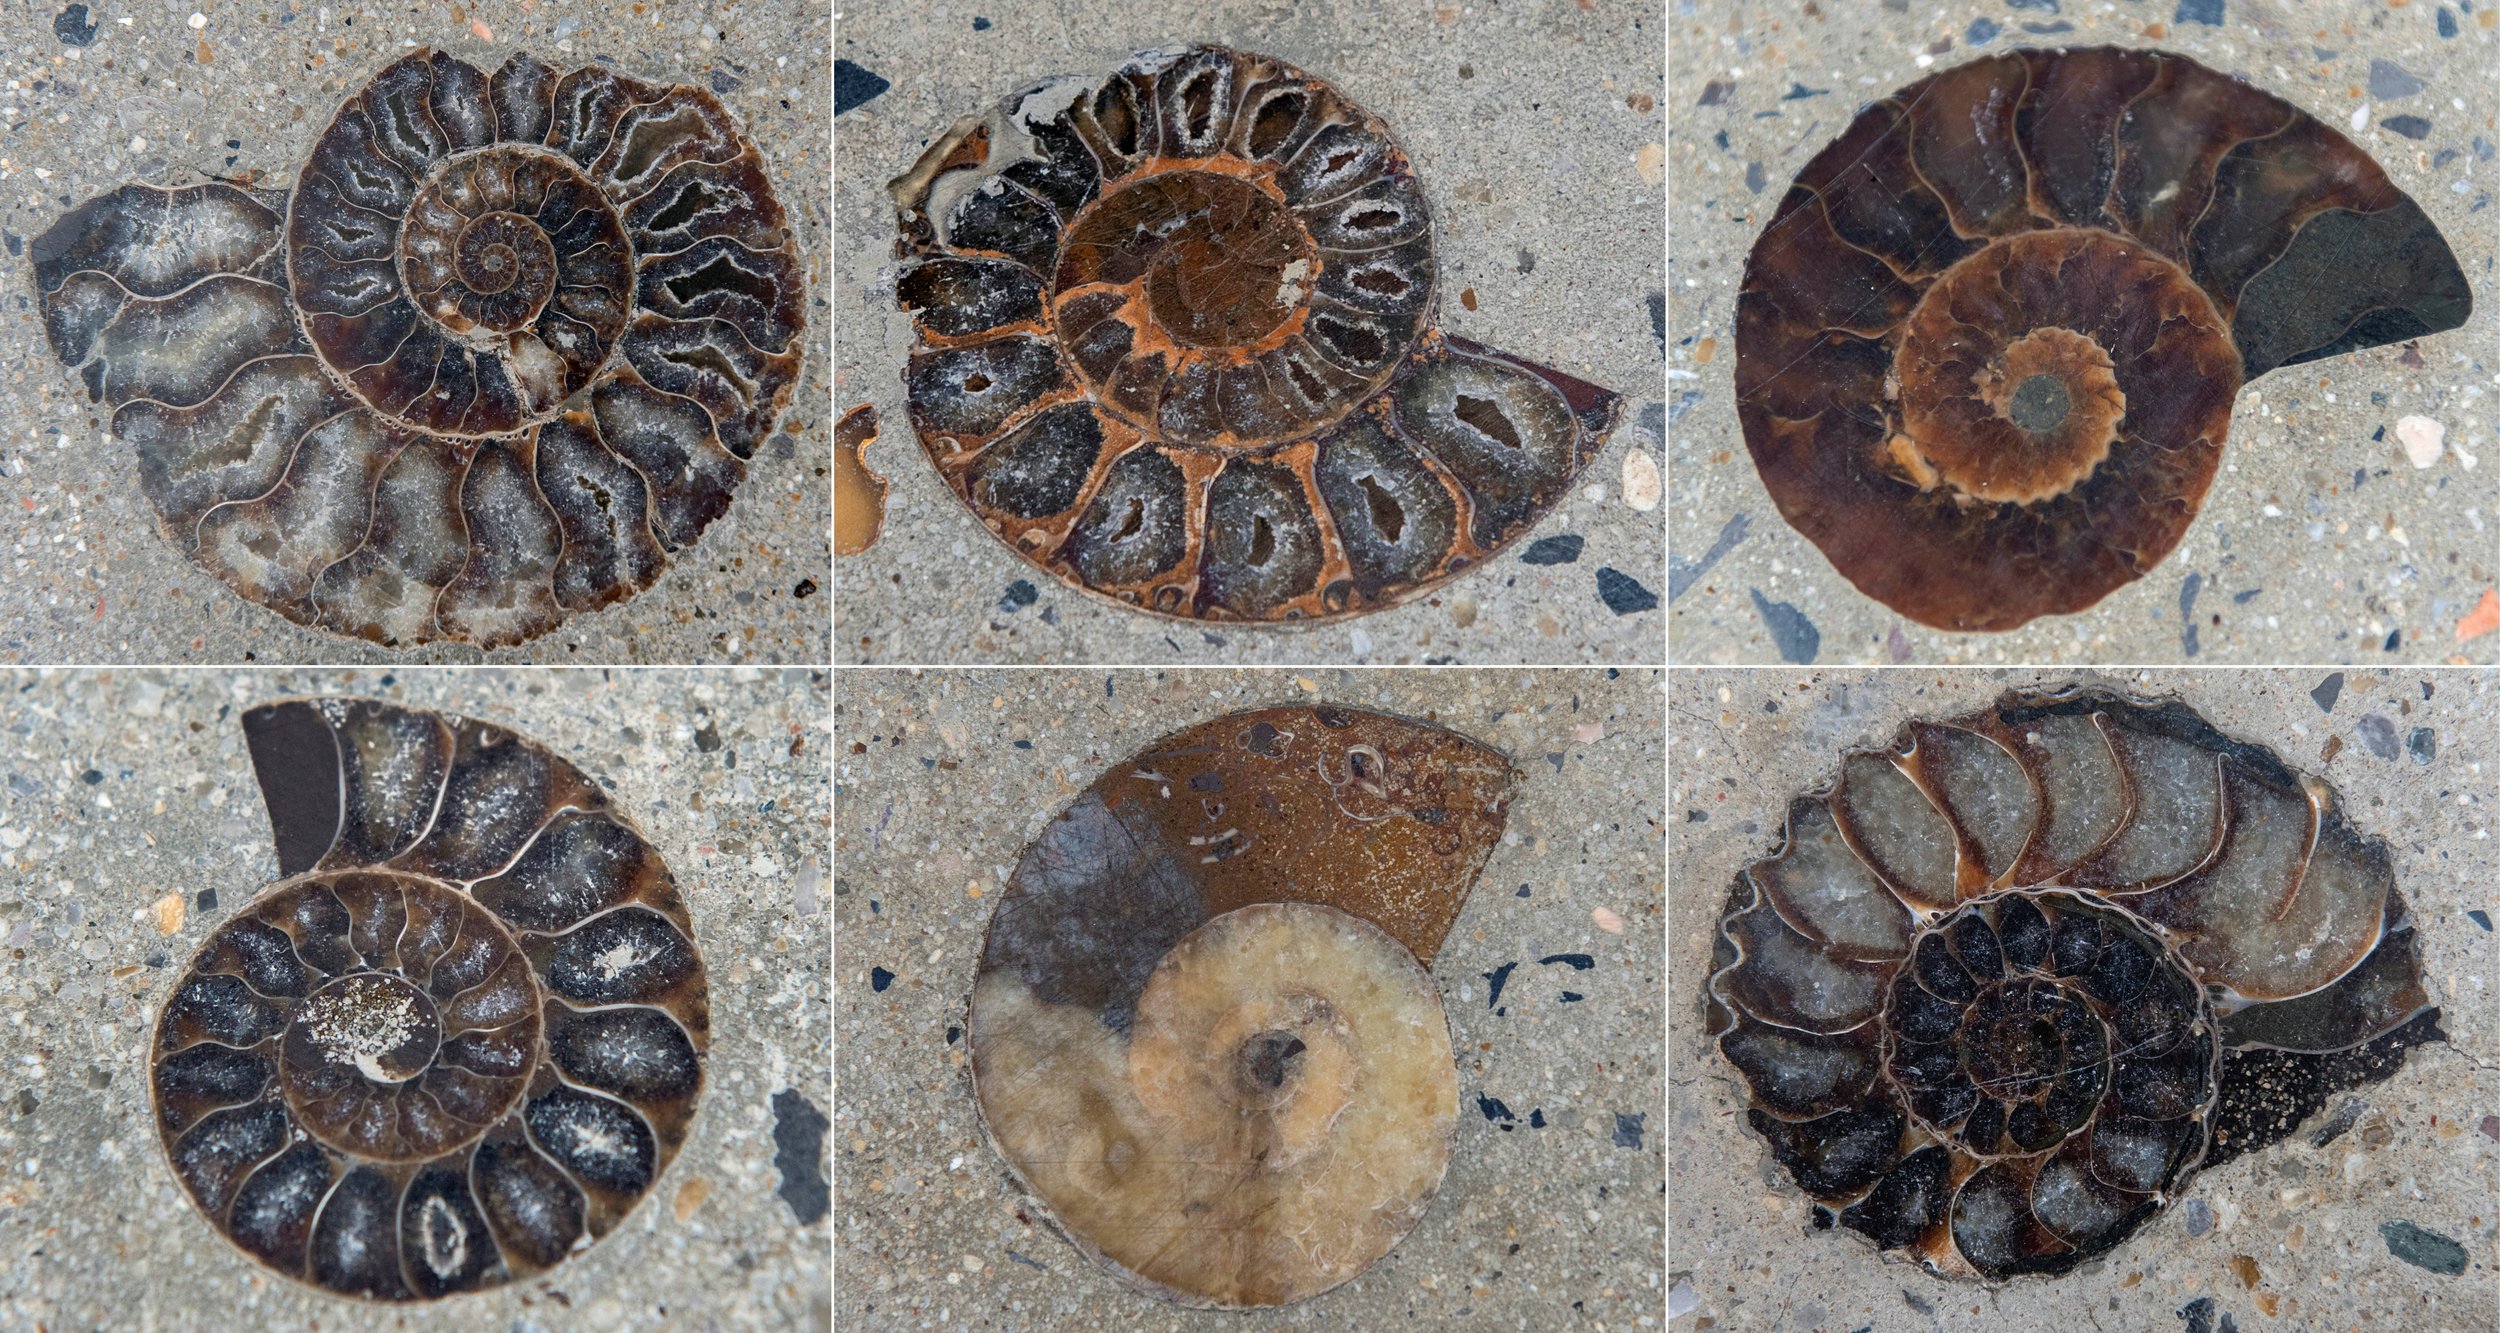 Ammonite fossils found outside shopping mall